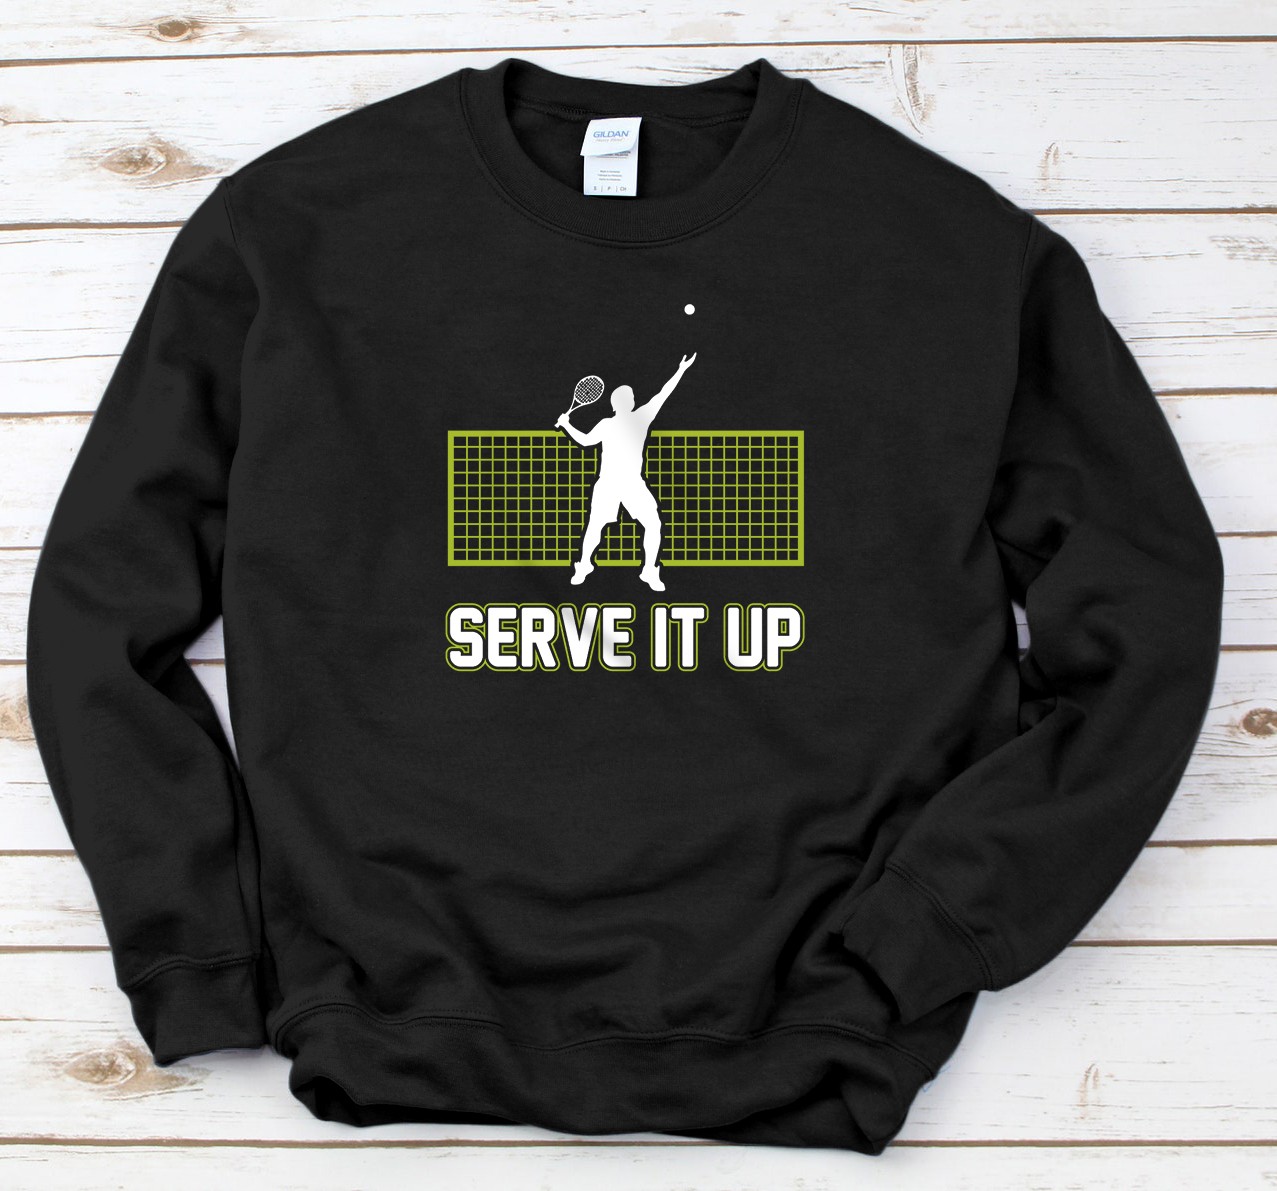 Personalized Serve It Up Funny Retro Style Tennis Player Christmas Gift Sweatshirt